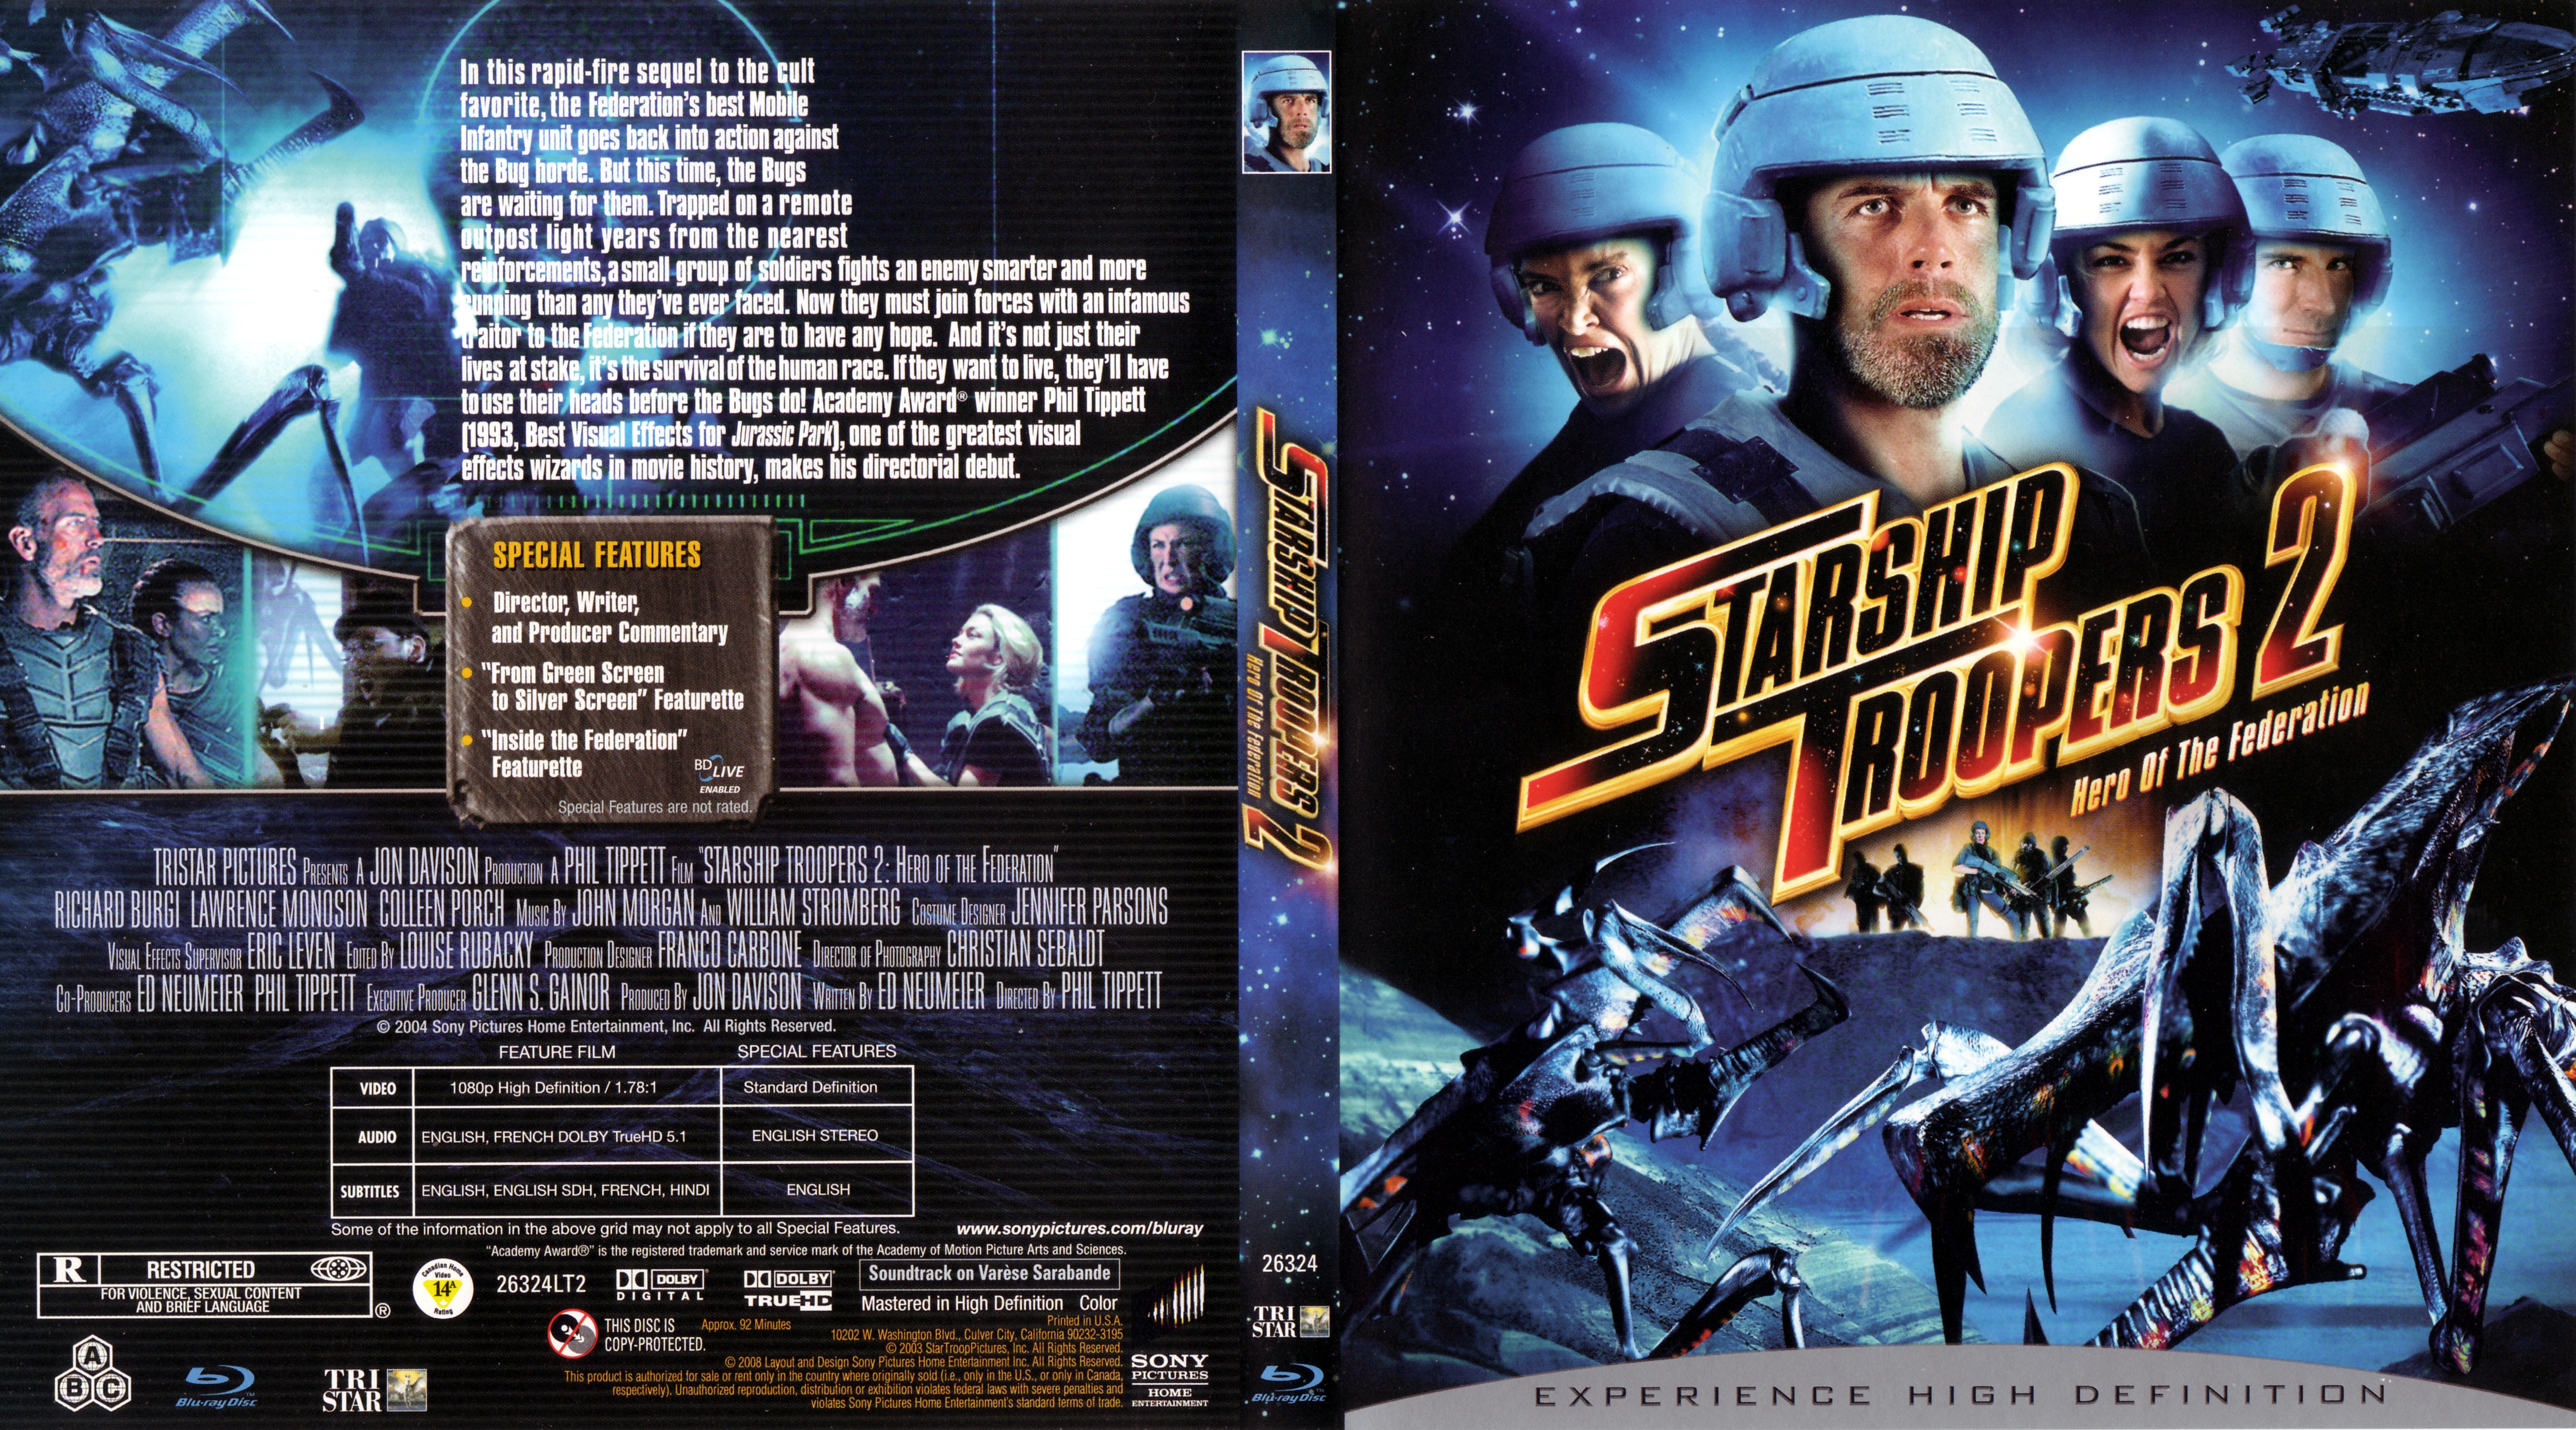 Jaquette DVD Starship troopers 2 Zone 1 (BLU-RAY)